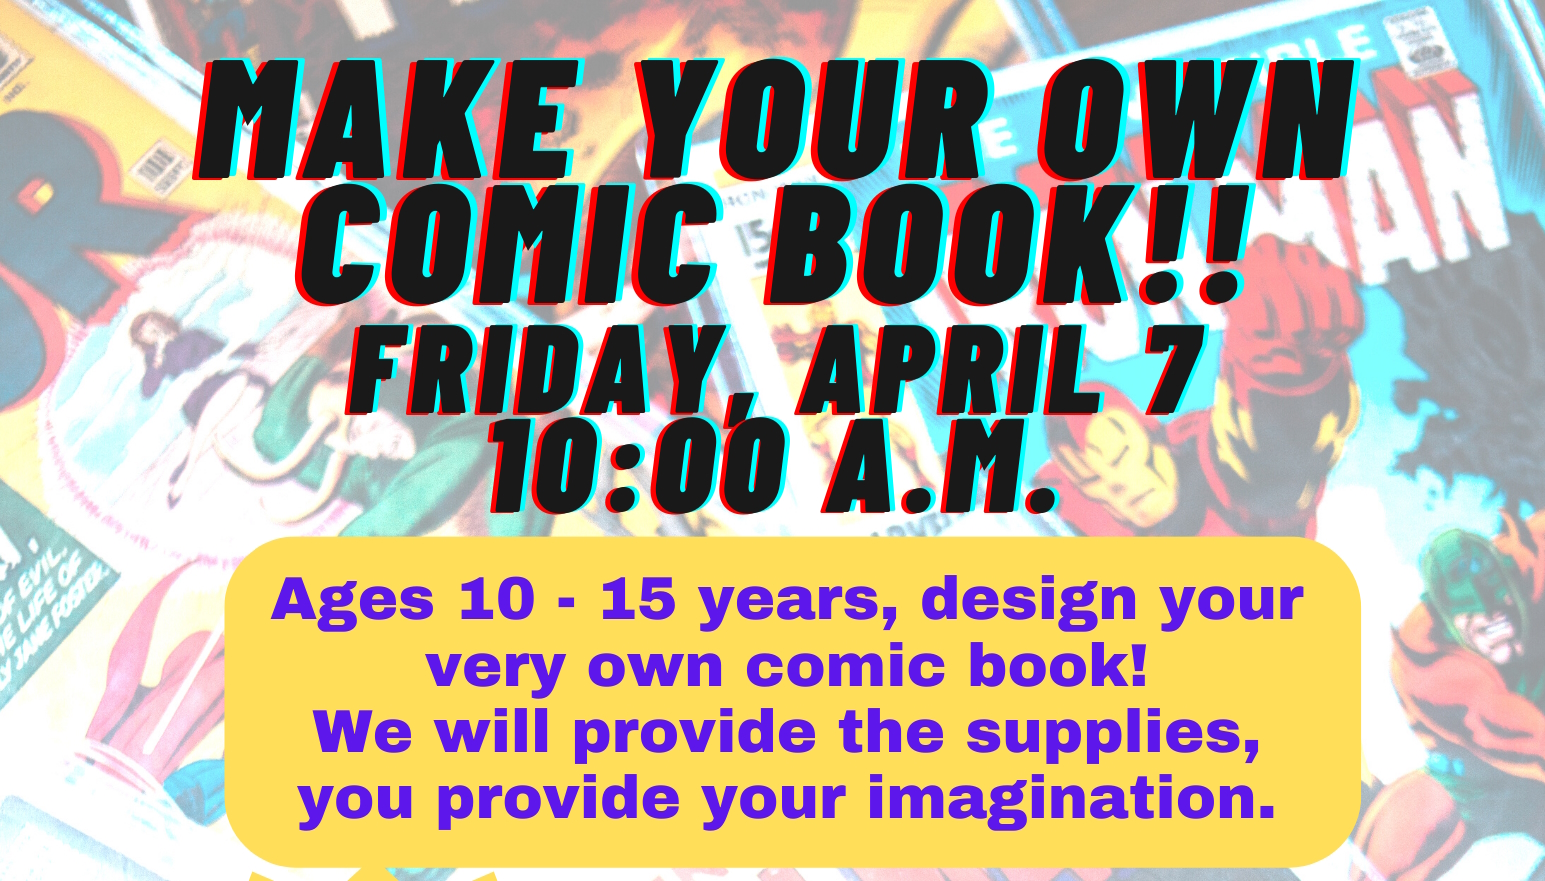 Make Your Own Comic Book! Friday, April 7 10:00 am For ages 10-15 years. Design your very own comic book! We will provide the supplies; you provide your imagination. Supplies are limited! Registration is required. Please call Youth Services at 219-873-3045 to sign up.